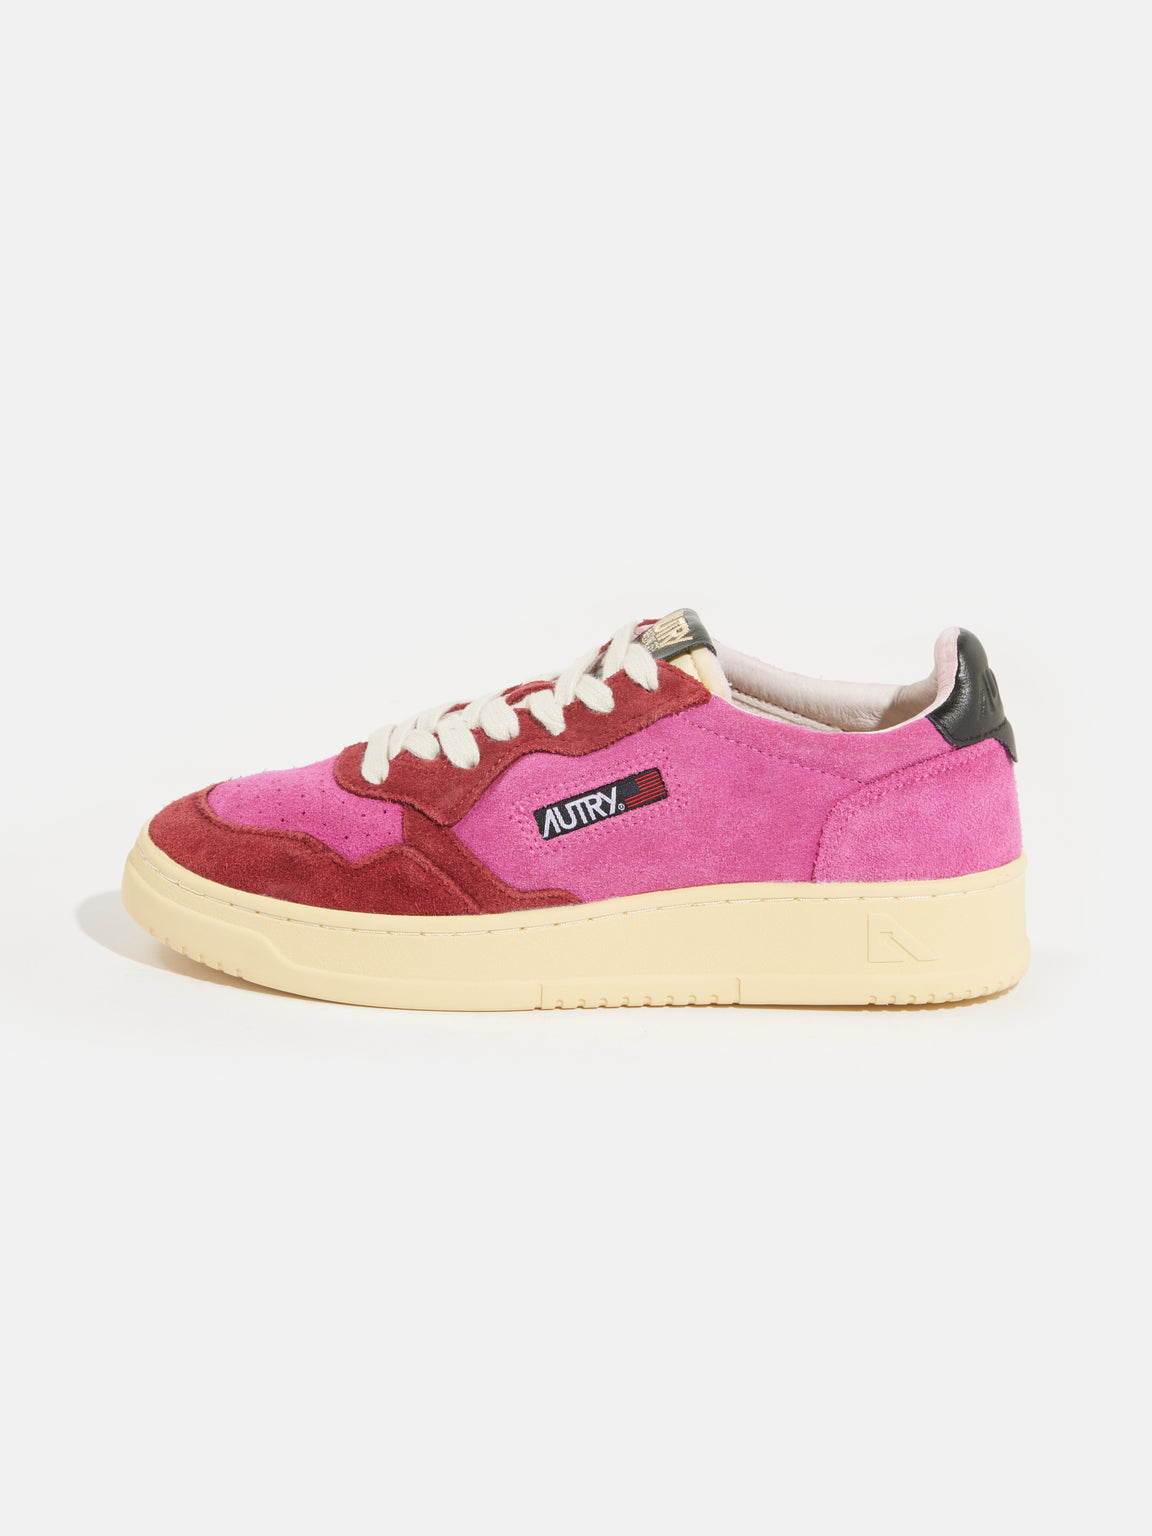 AUTRY | MEDALIST LOW FOR WOMEN PINK